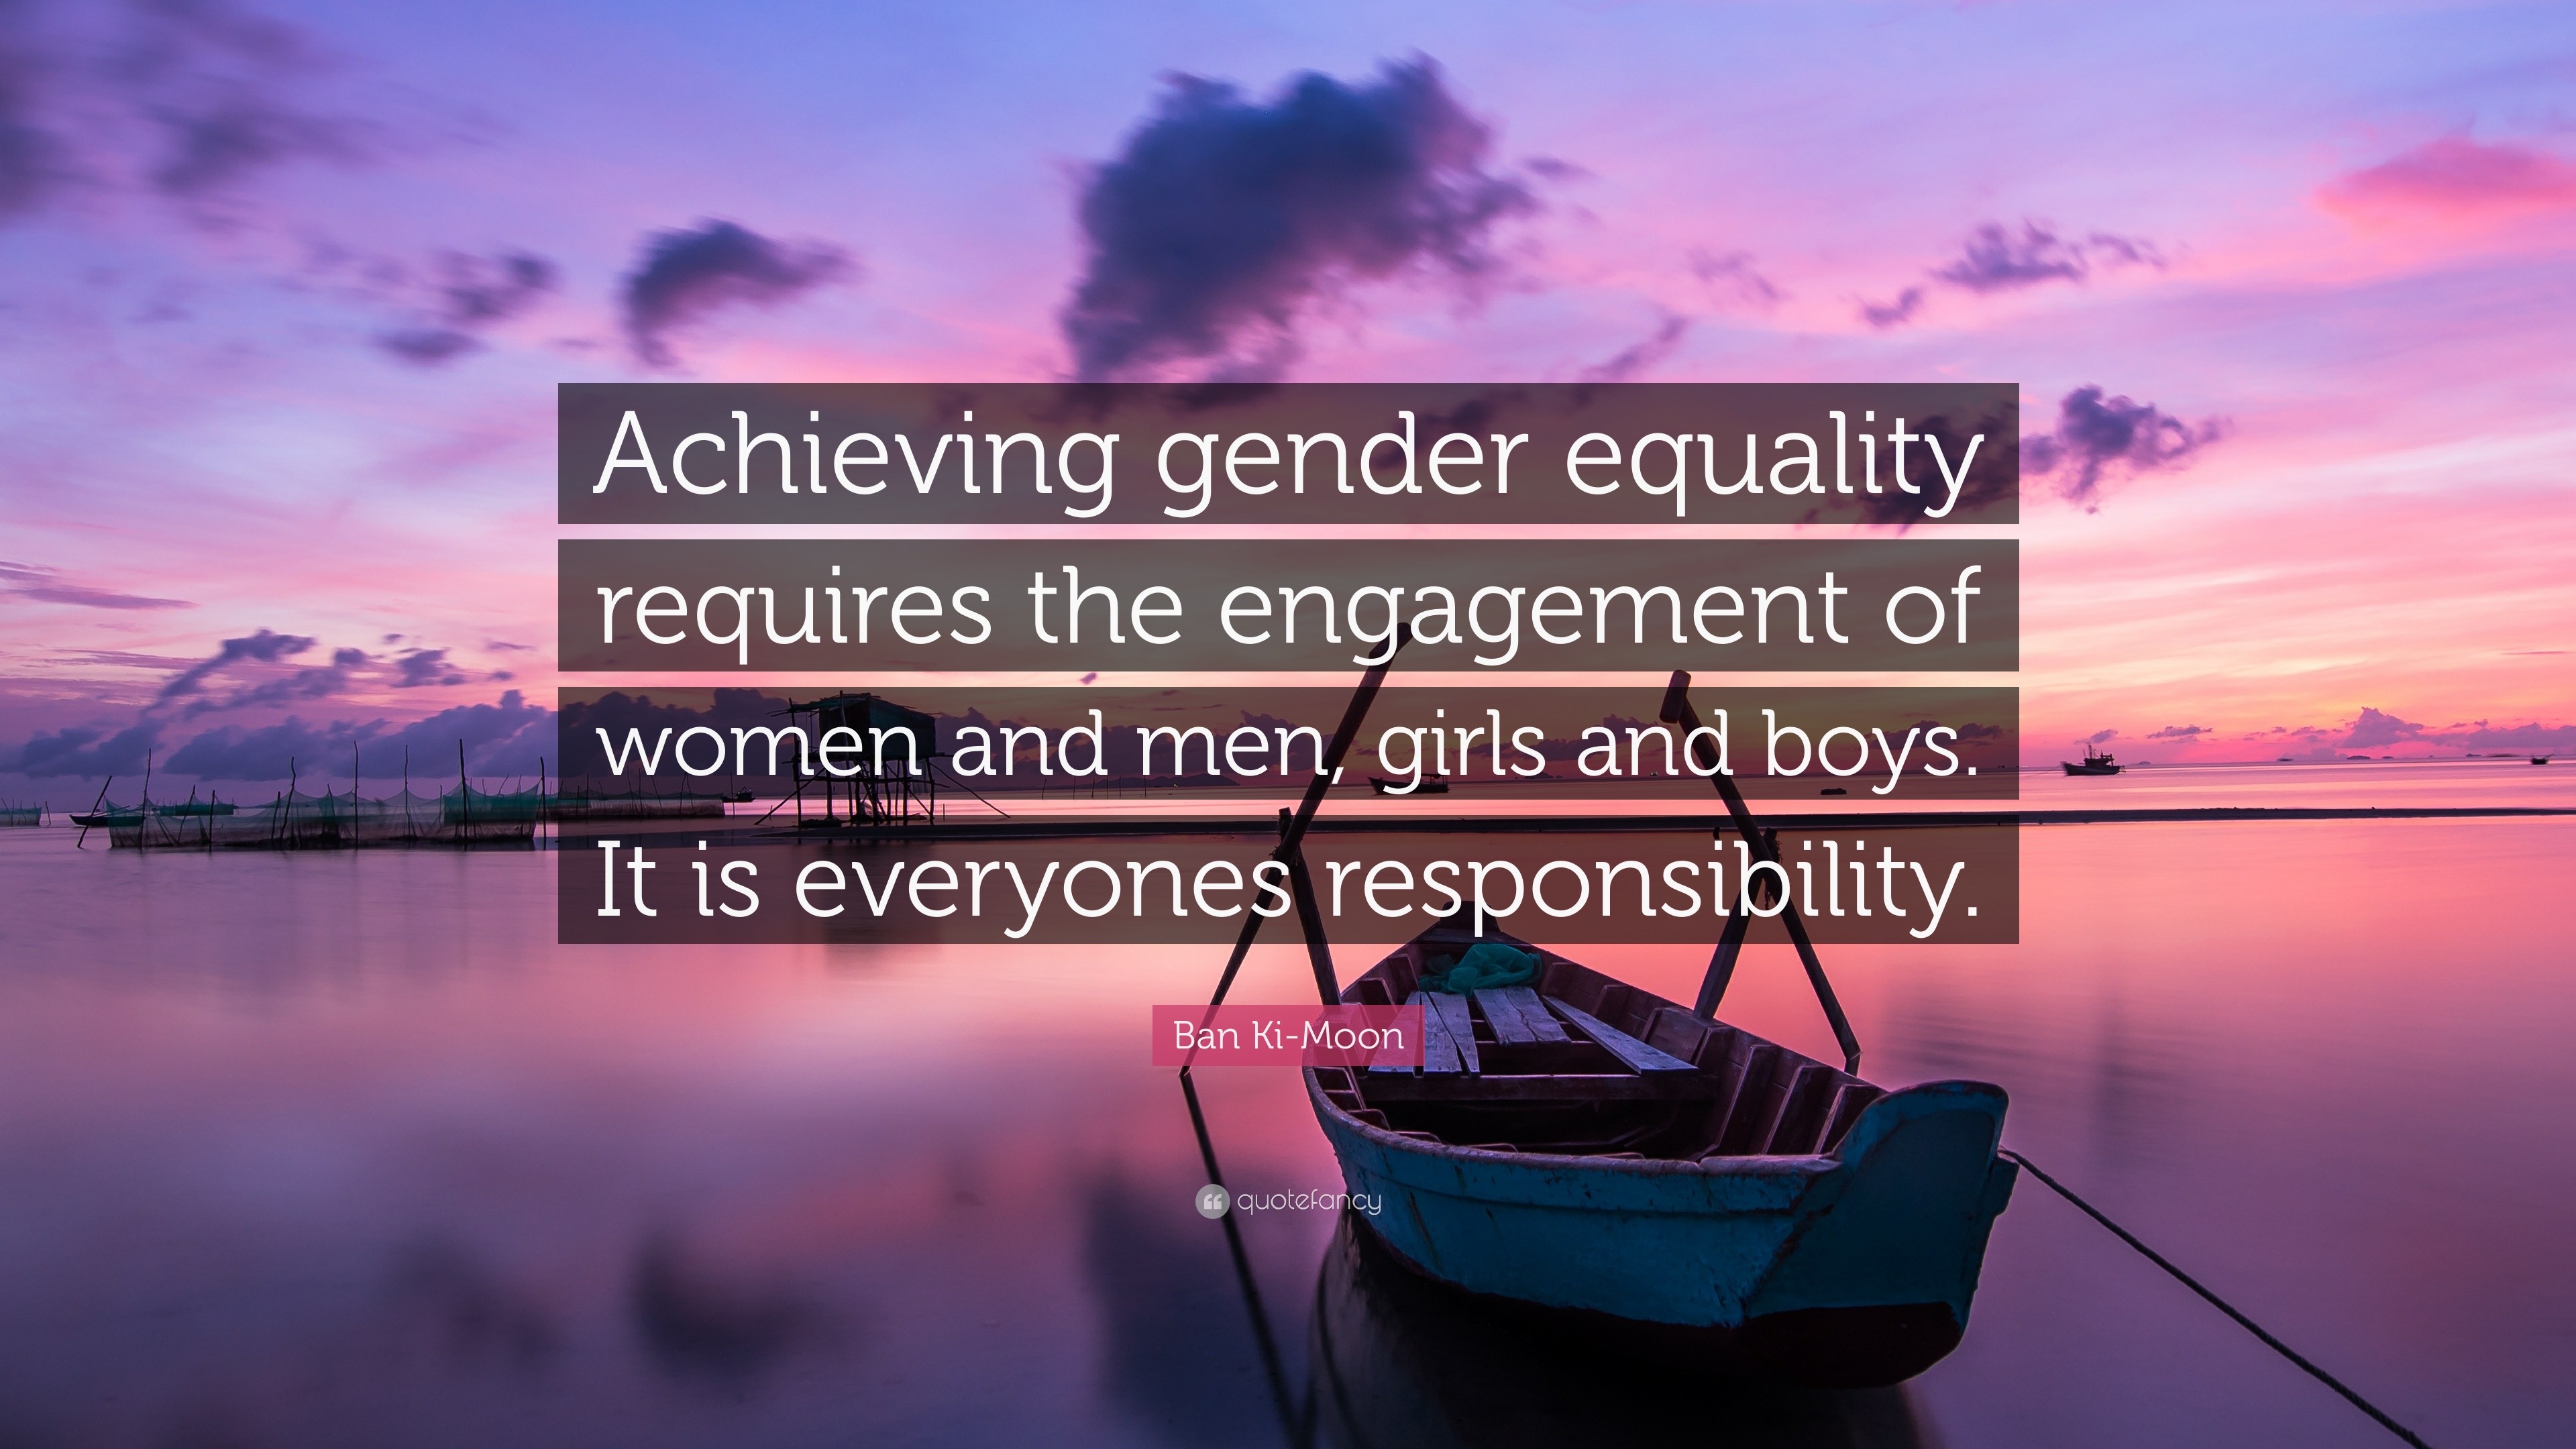 Ban Ki-Moon Quote: “Achieving gender equality requires the engagement